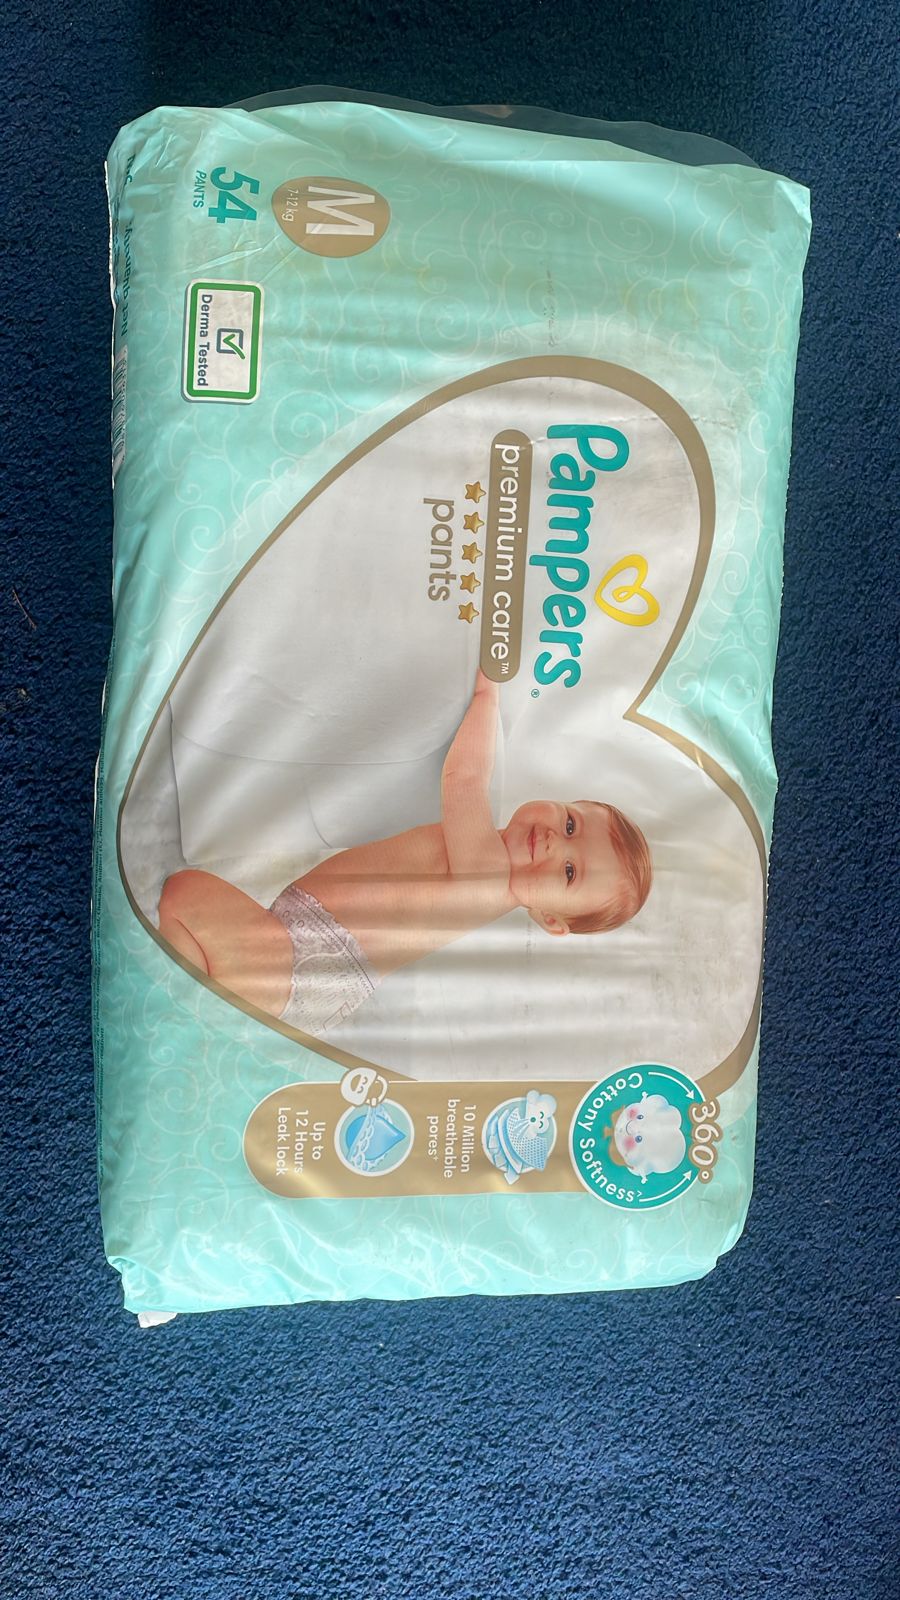 Buy Pampers Premium Care Pants, New Born, Extra Small Size Baby Diapers  Online at Best Price | Cossouq